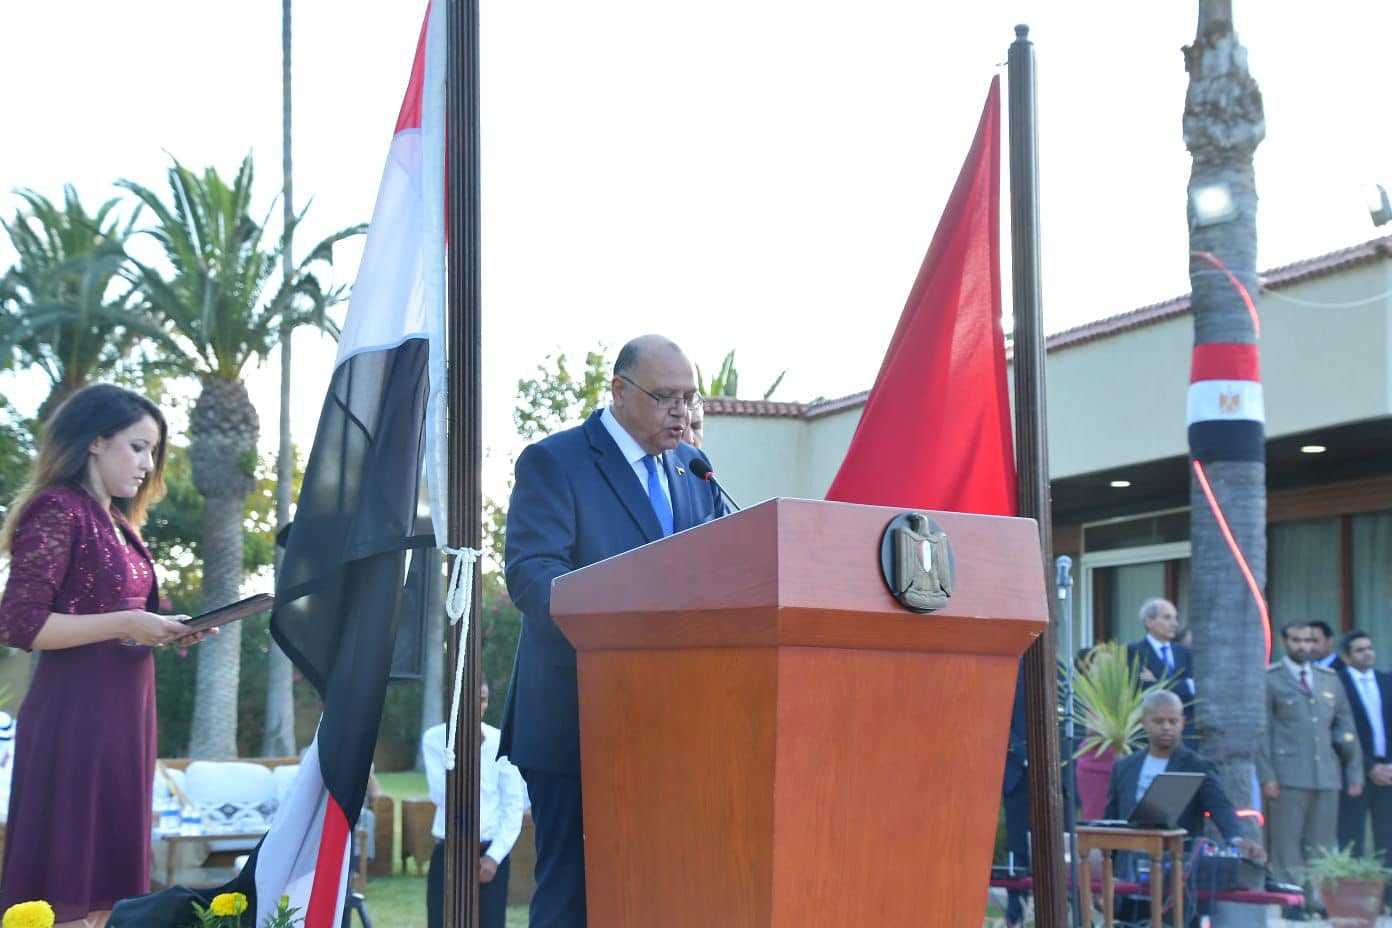 The Egyptian Embassy in Morocco holds a celebration on the anniversary of the glorious July 23 Revolution